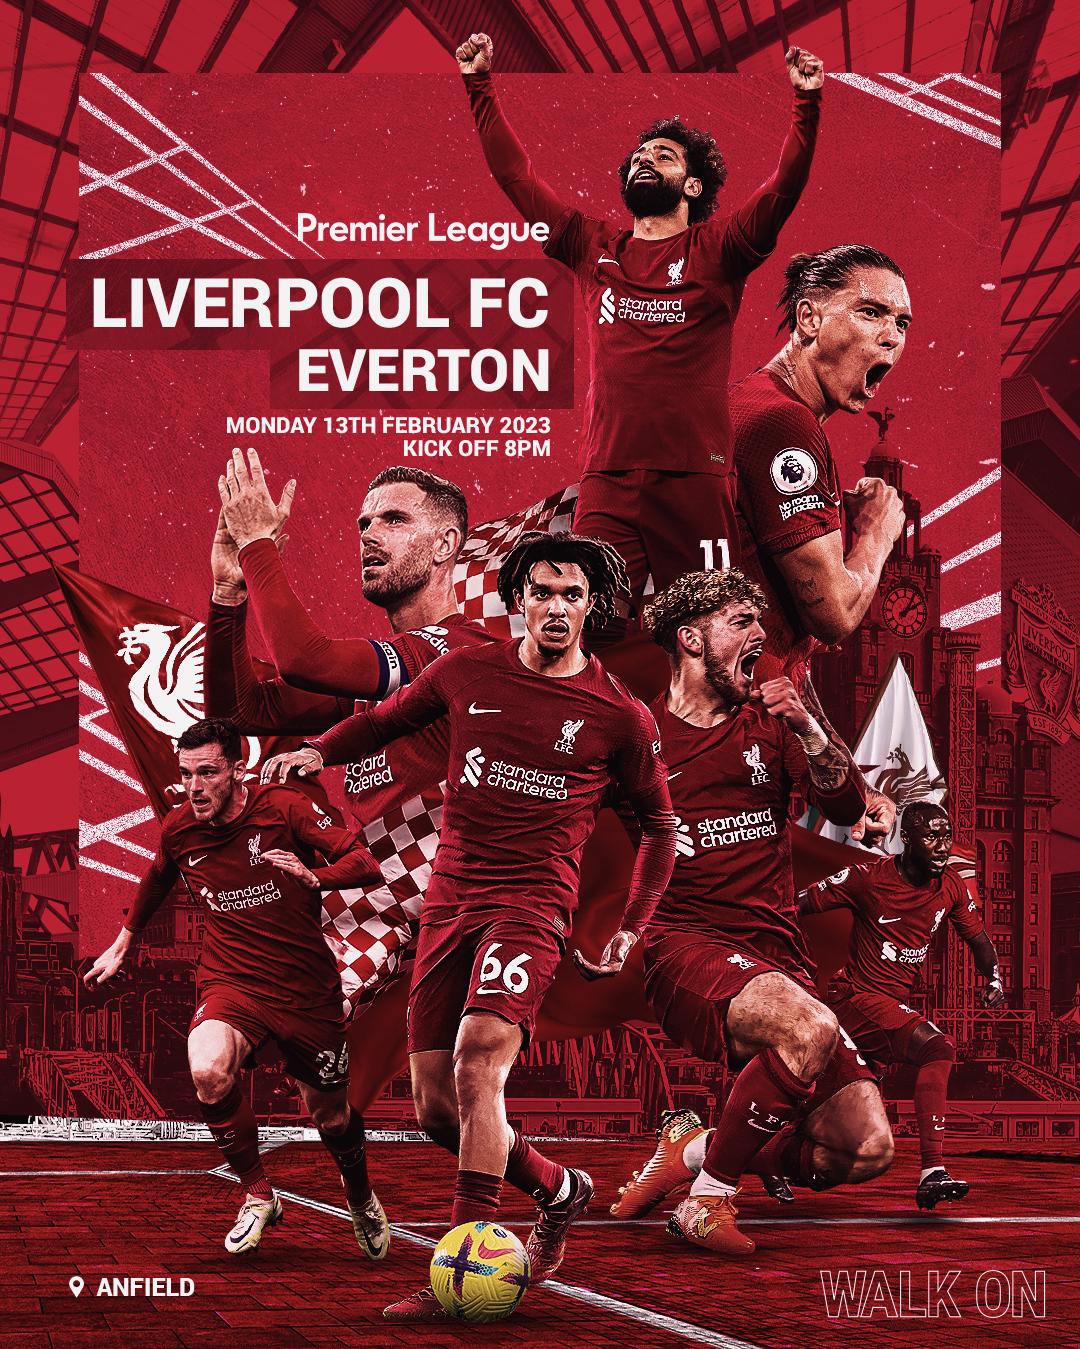 Free download Liverpool FC on Its derby day UP THE REDS [1080x1350] for